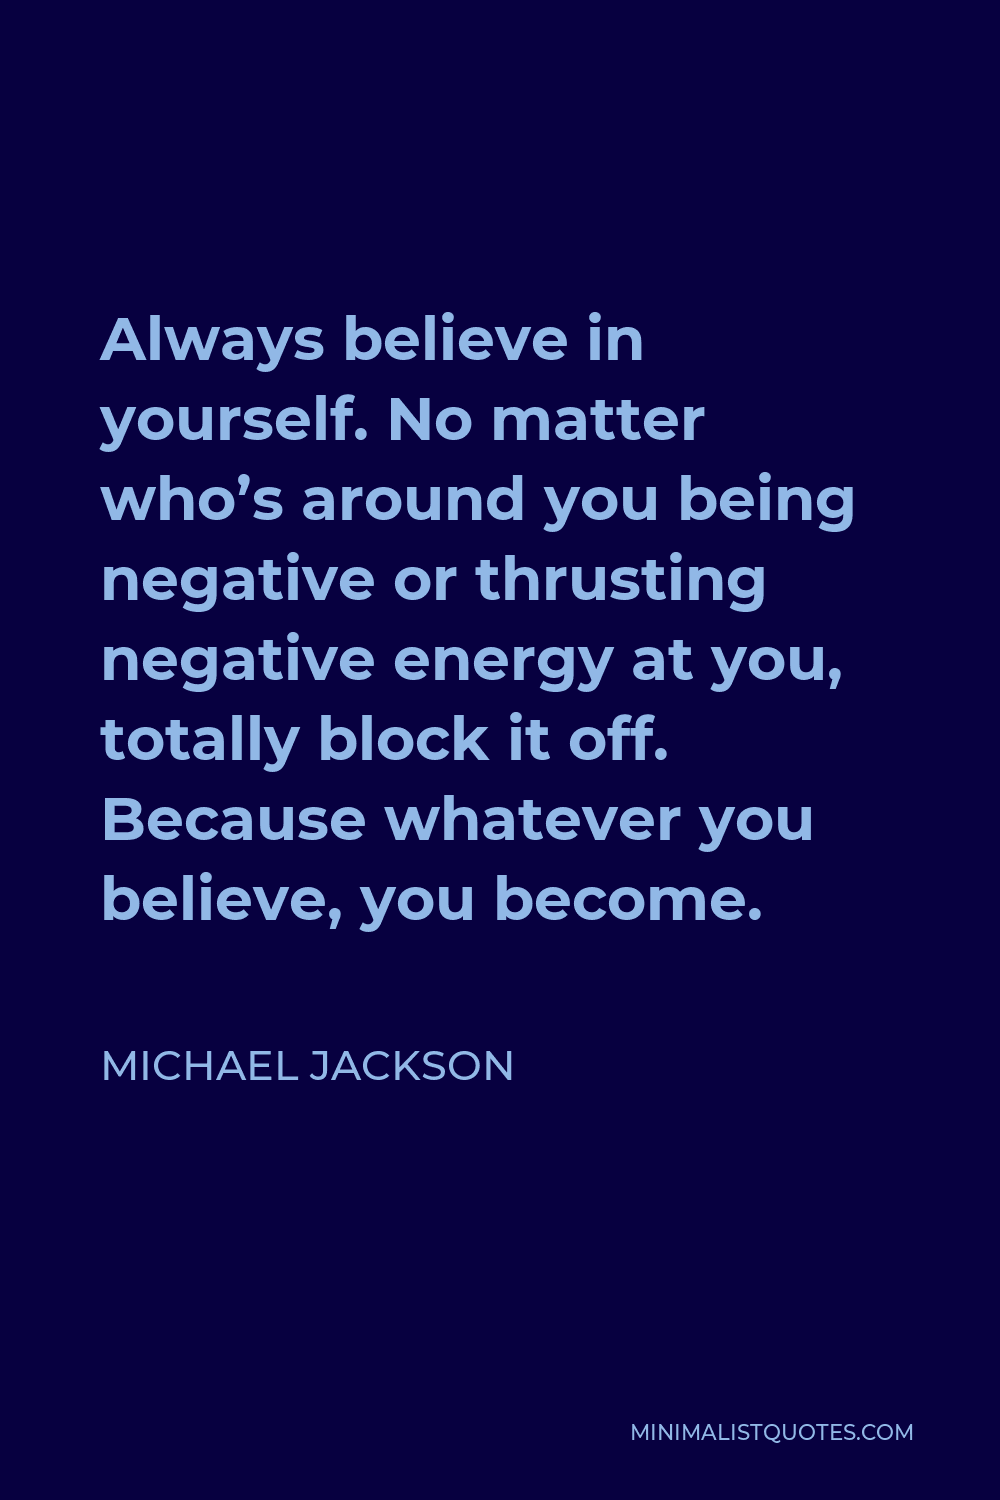 Michael Jackson Quote - Always believe in yourself. No matter who’s around you being negative or thrusting negative energy at you, totally block it off. Because whatever you believe, you become.